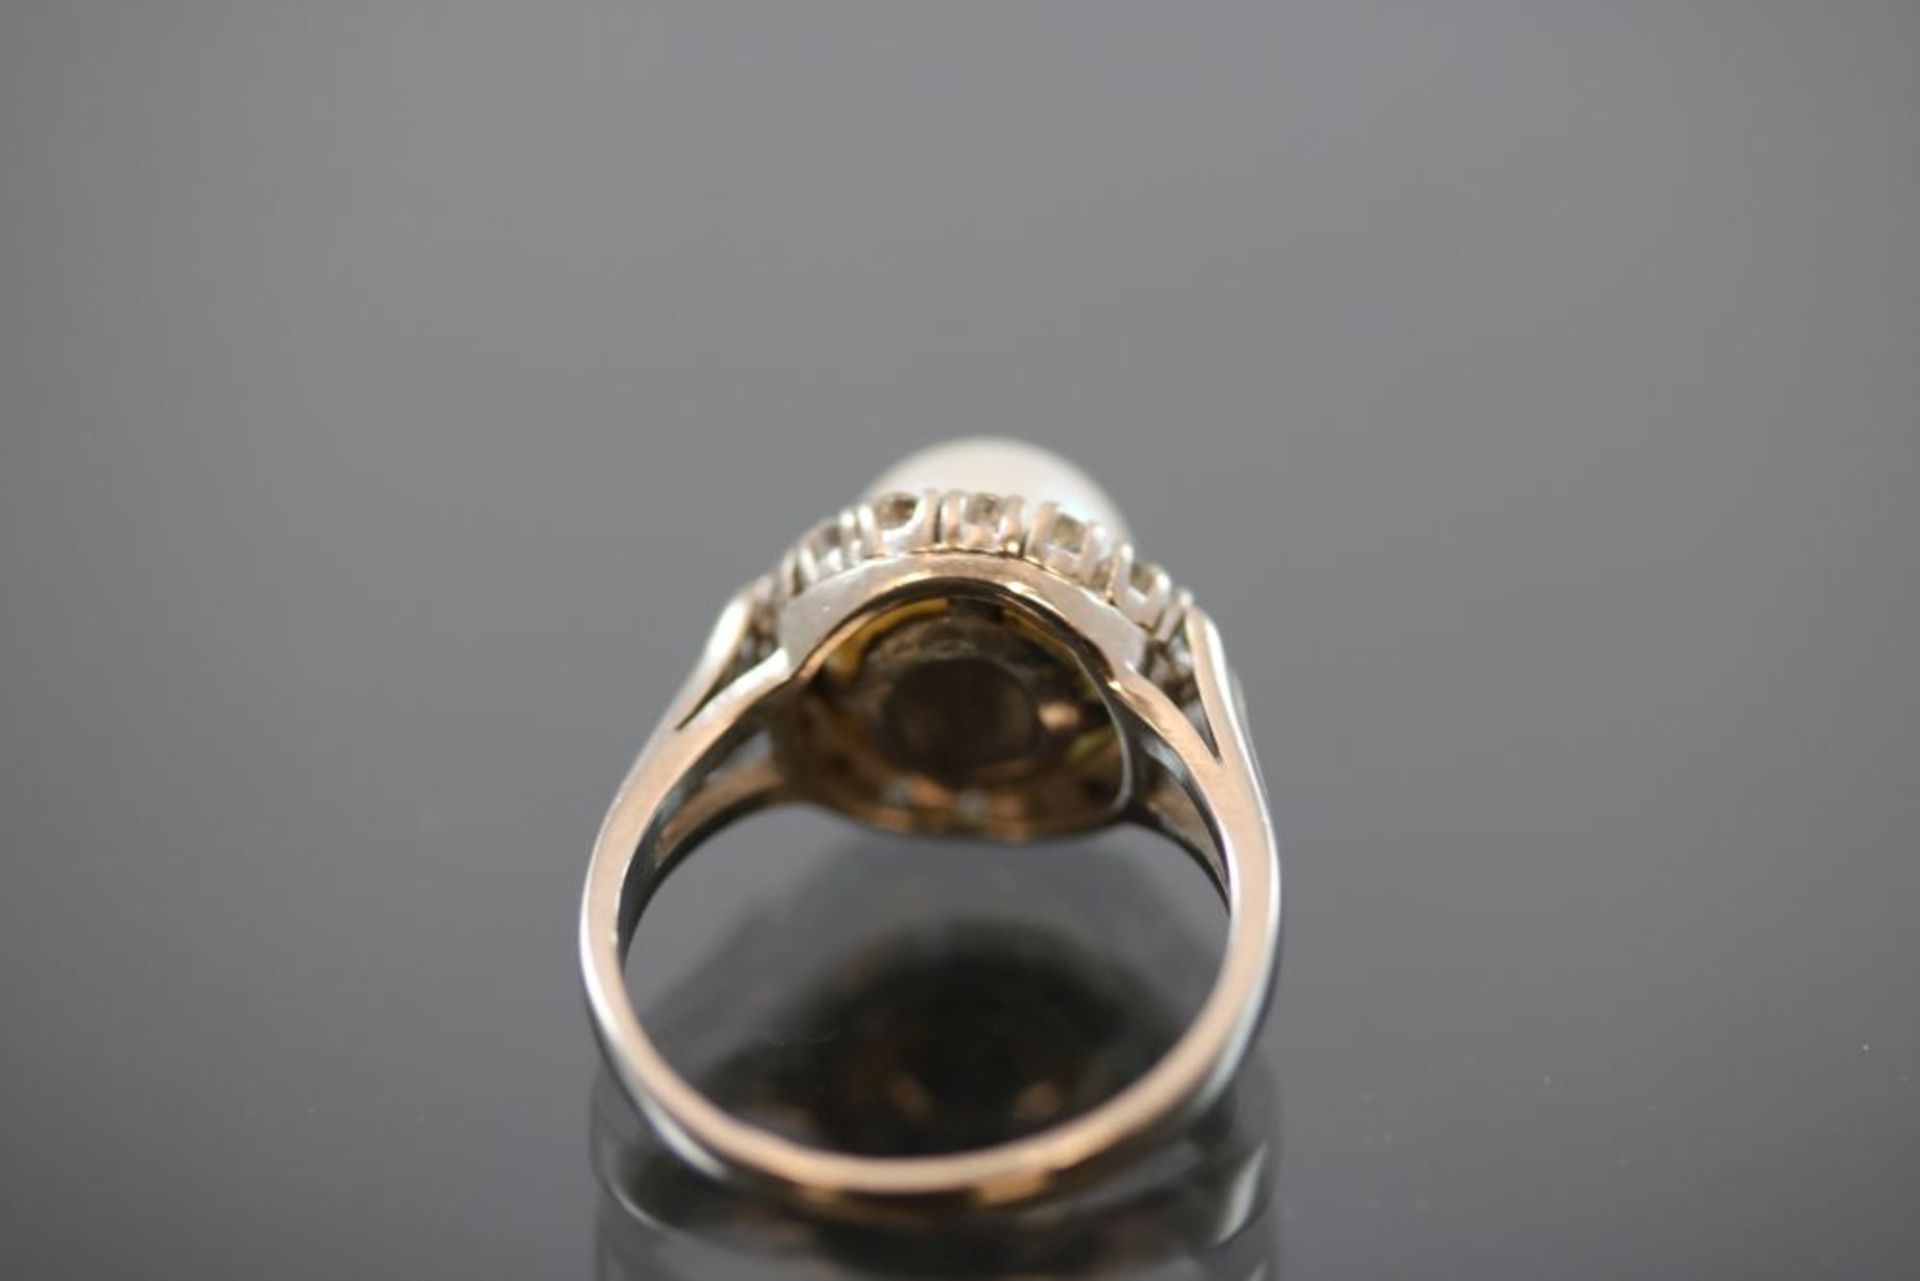 Perl-Brillant-Ring, 750 Weißgold - Image 3 of 3